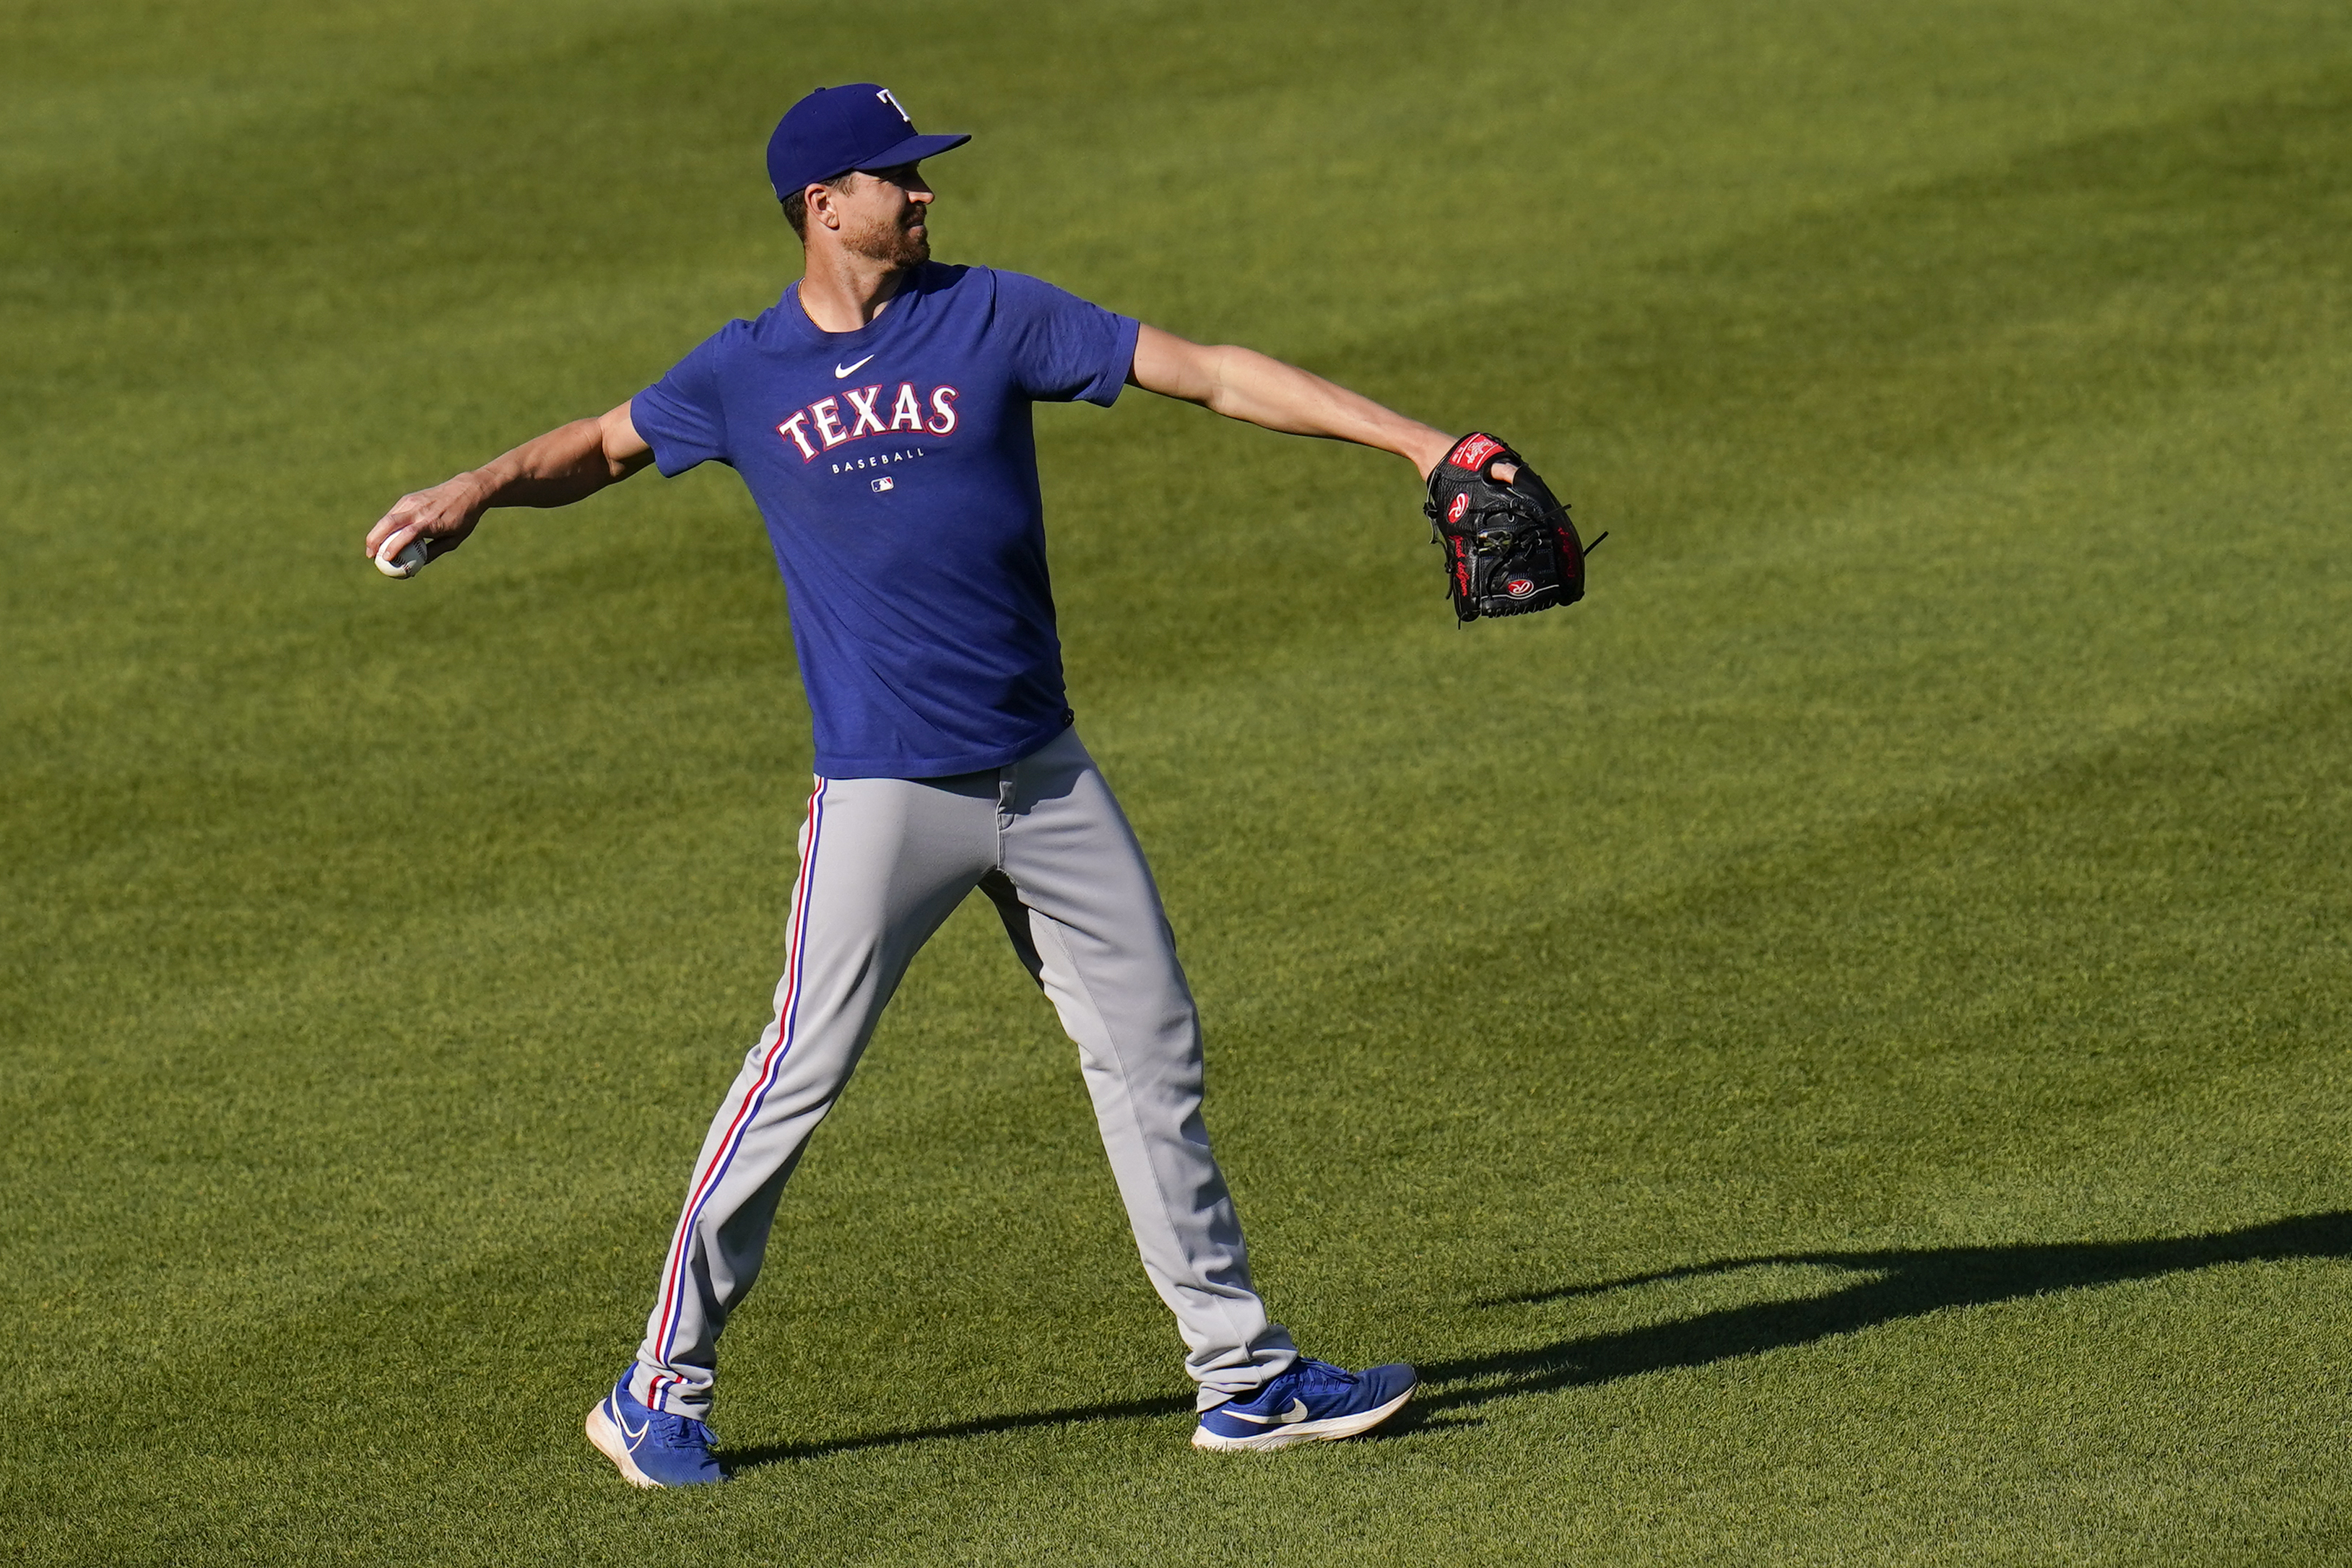 Jacob deGrom, oft-injured Rangers ace, to have season-ending Tommy